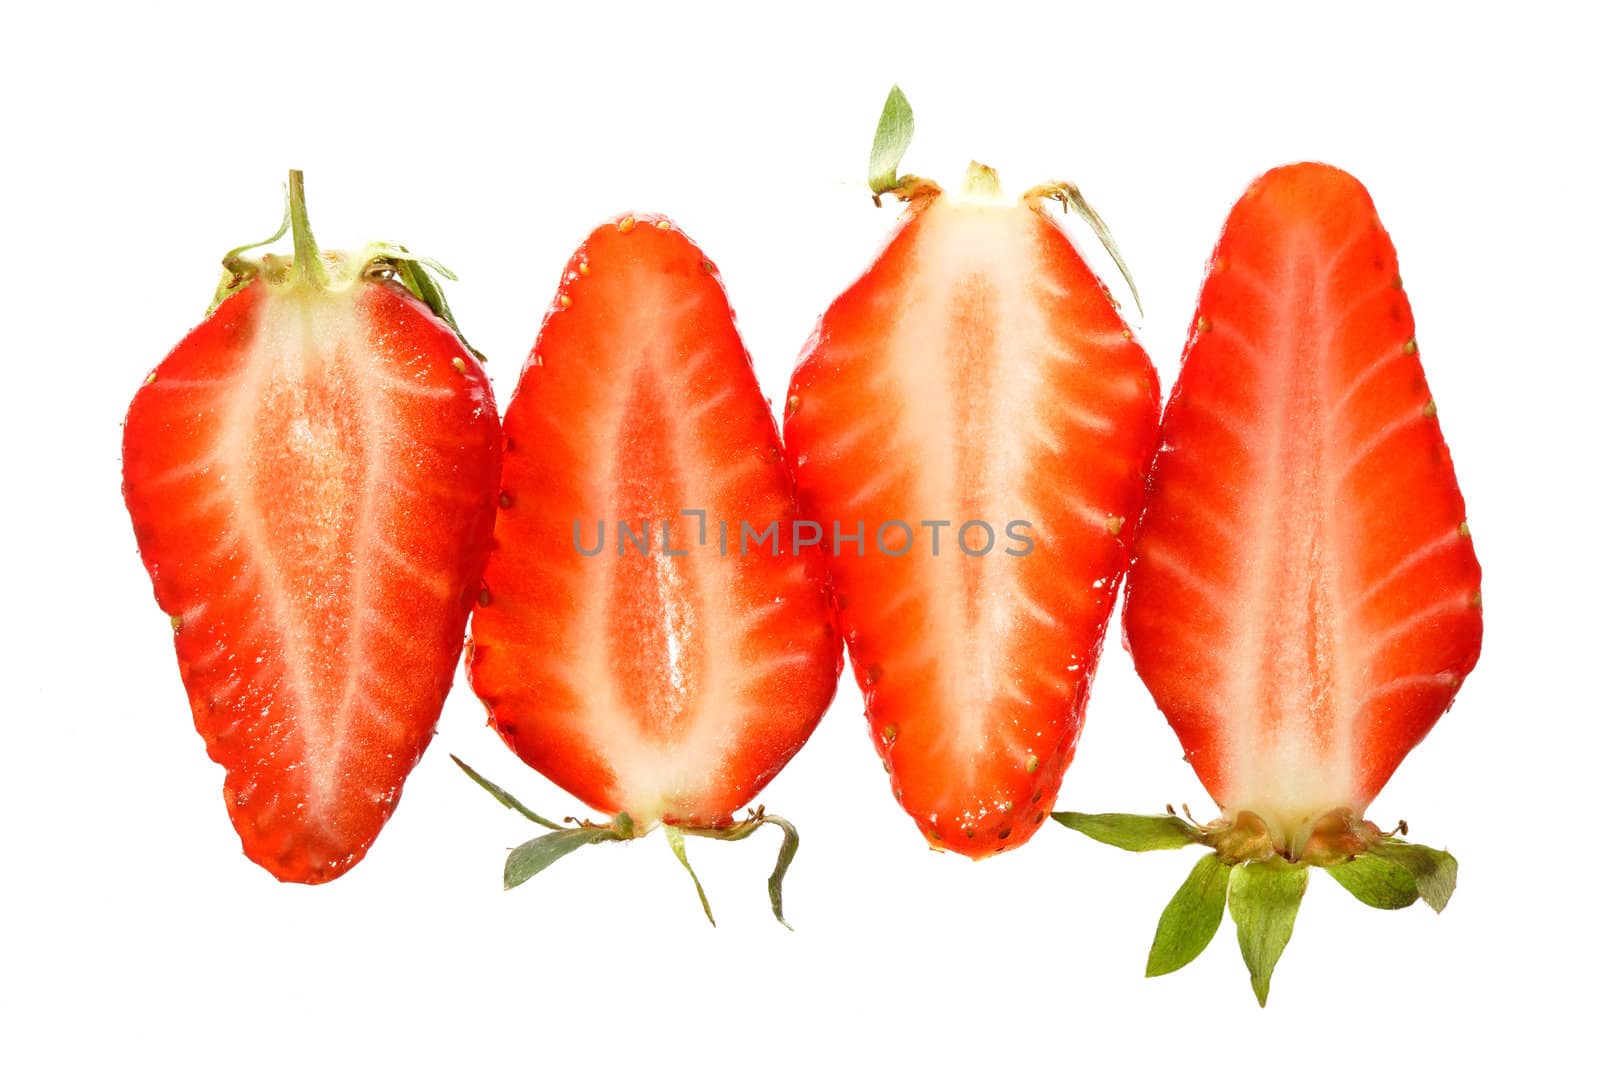 Slices of red strawberries isolated on white